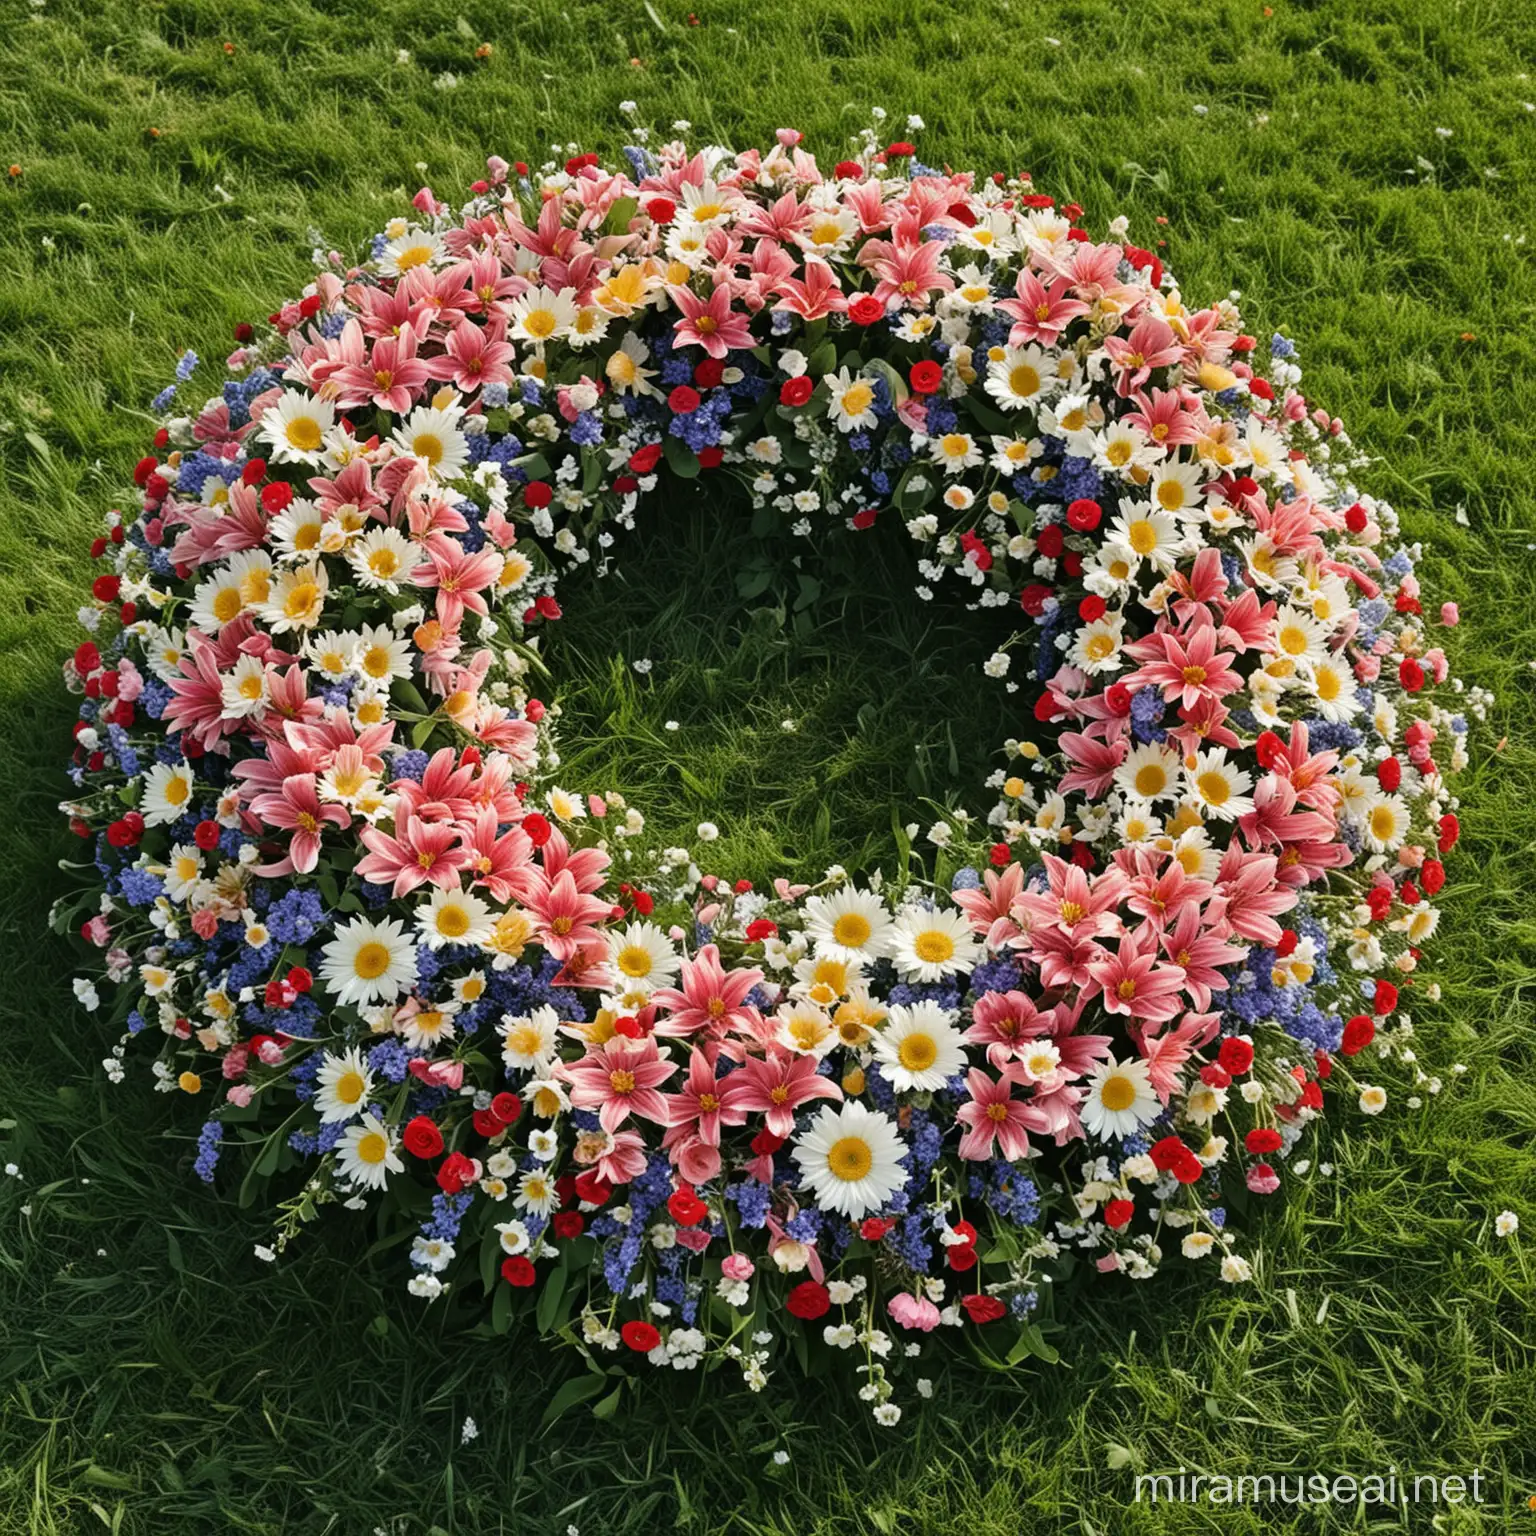 Flower Meadow with Central Funeral Wreath